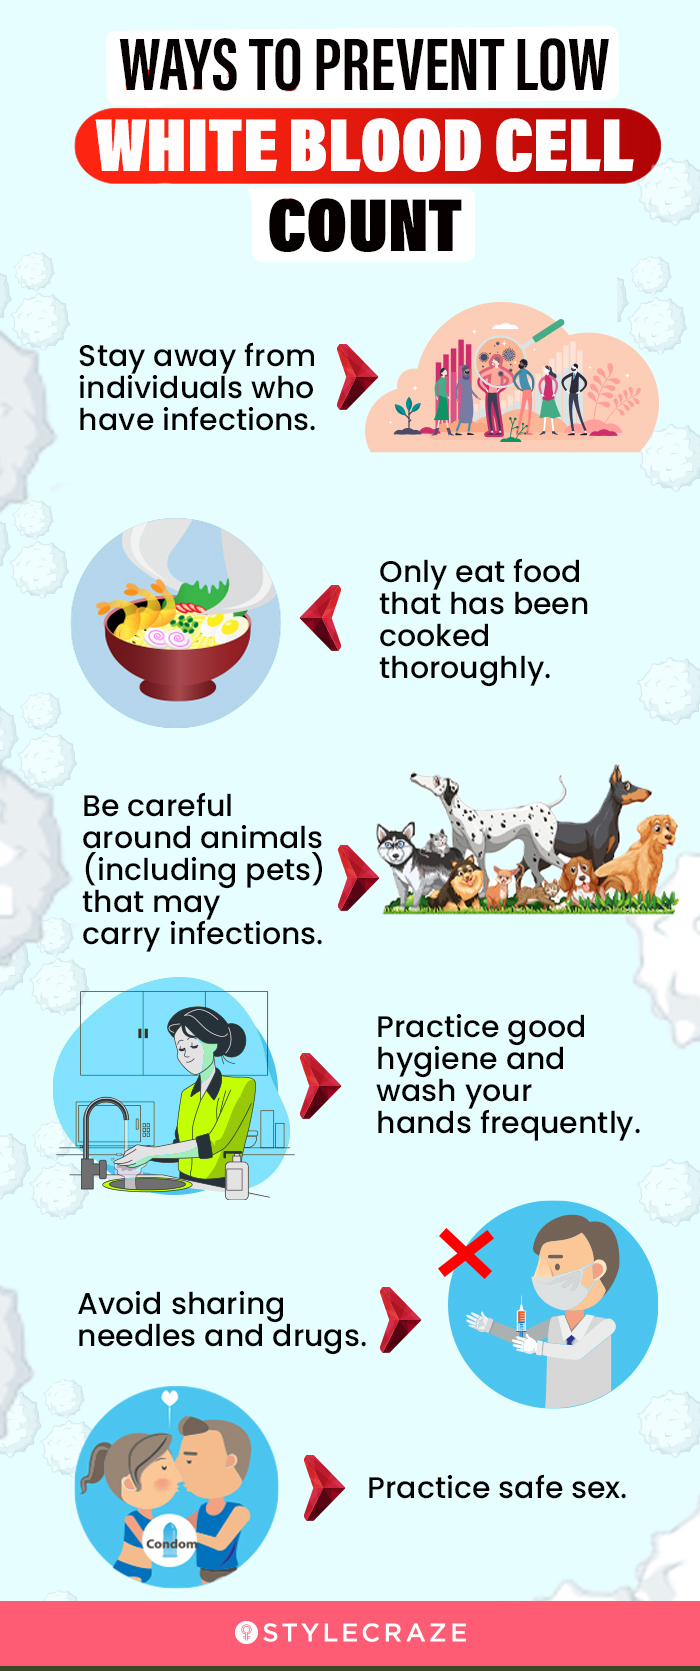 ways to prevent low white blood cell count [infographic]